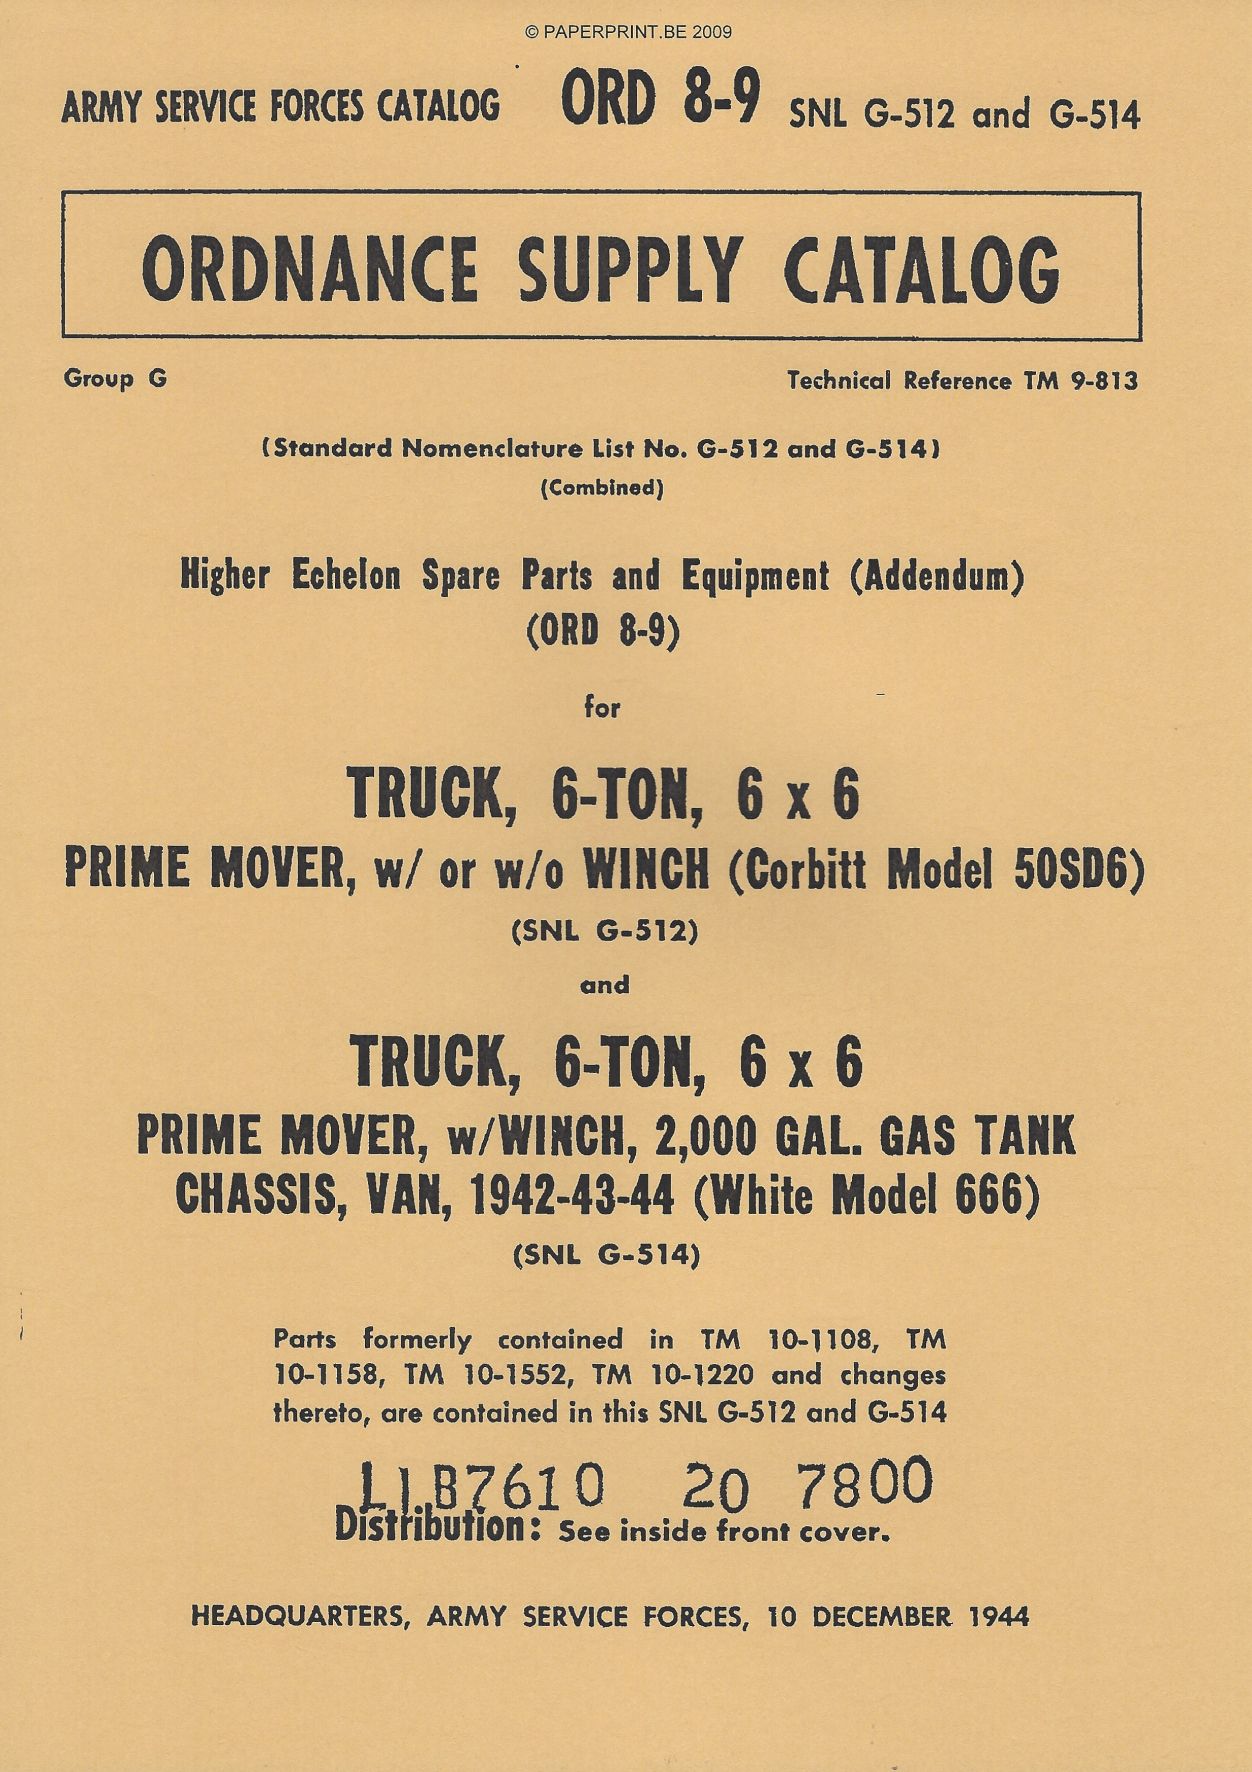 SNL G-512 AND G-514 PARTS LIST FOR TRUCK, 6- TON, 6x6 PRIME MOVER, W/ OR W/O WINCH (CORBITT MODEL 50SD6) AND PRIME MOVER, W/WINC